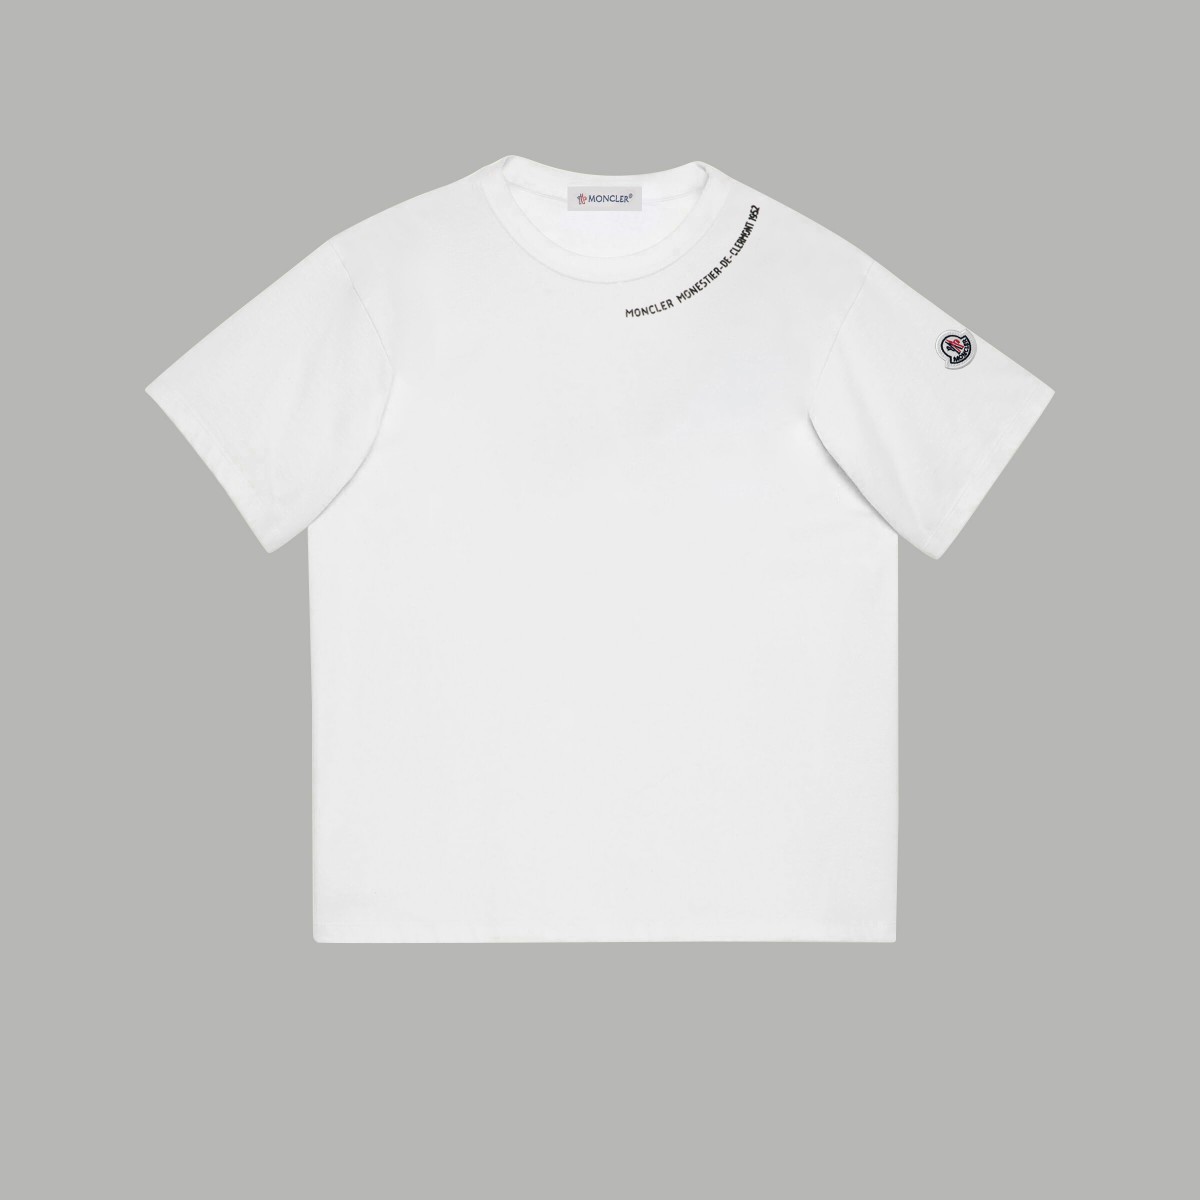 Moncler Clothing T-Shirt Embroidery Unisex Cotton Spring/Summer Collection Short Sleeve